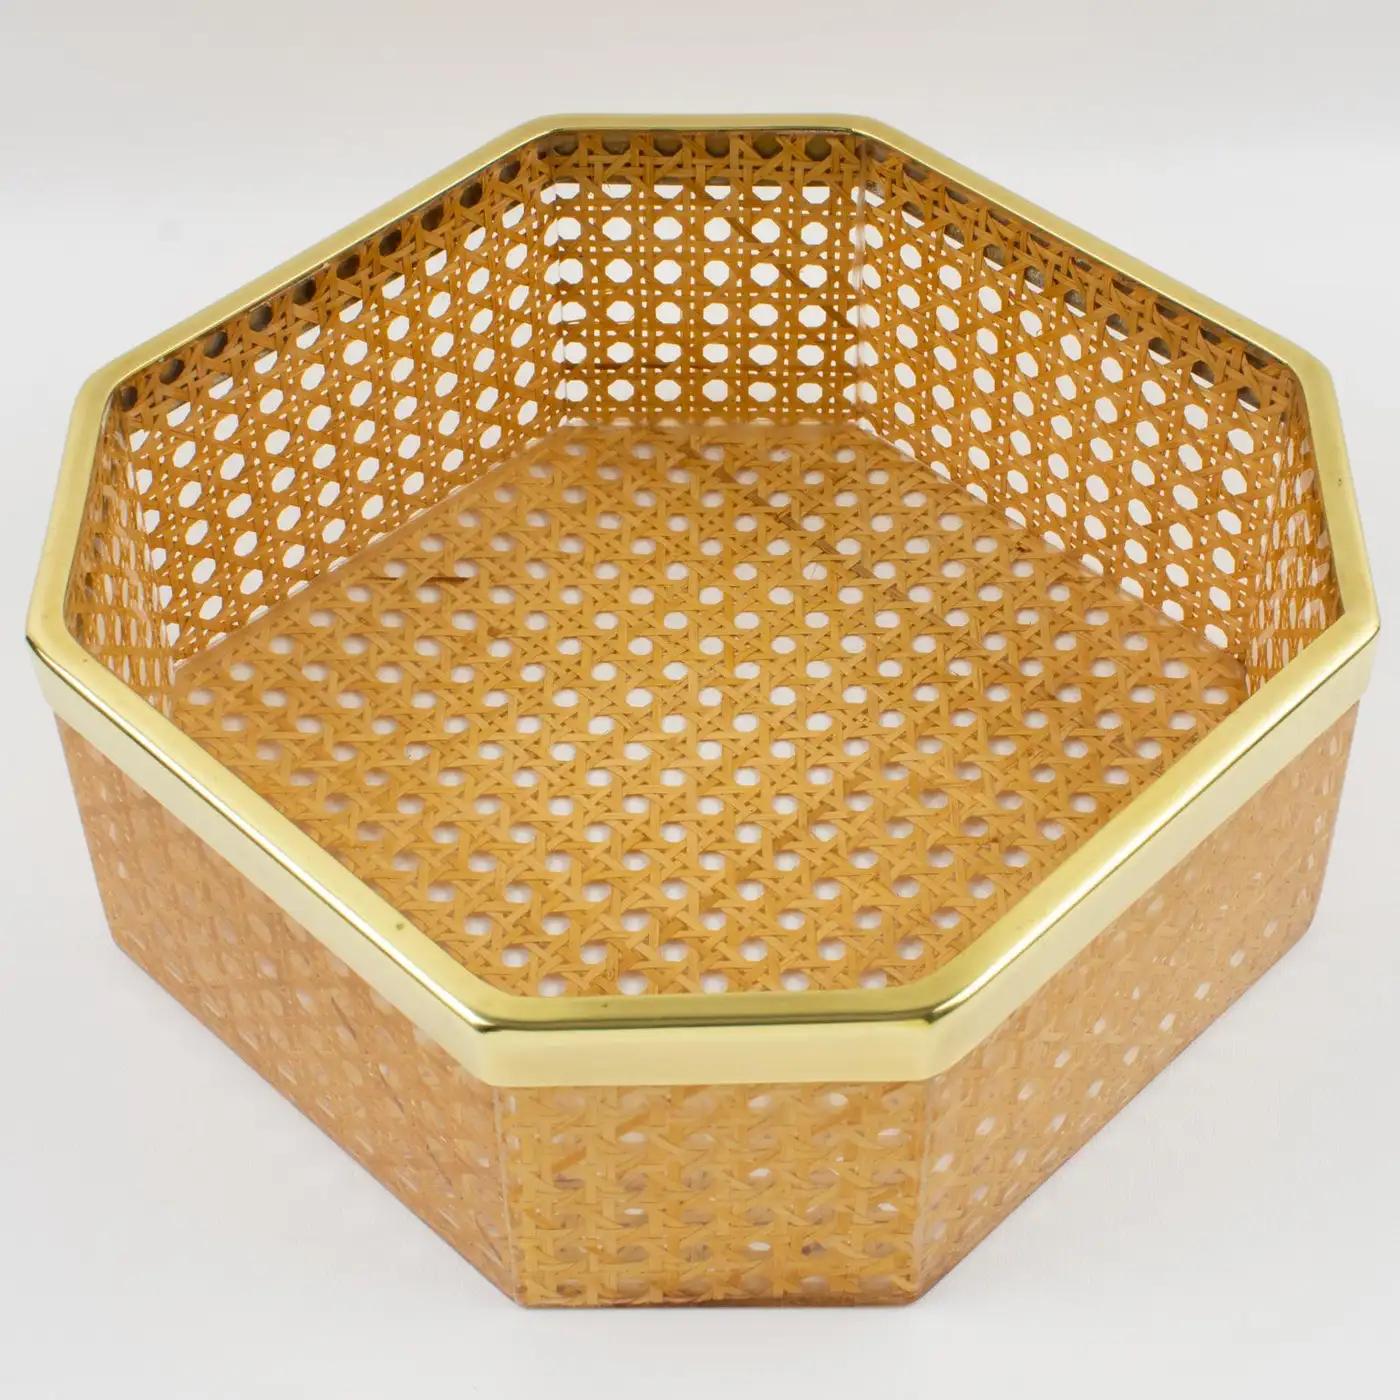 Metal Christian Dior Home Lucite and Rattan Basket Bowl Centerpiece, 1970s For Sale